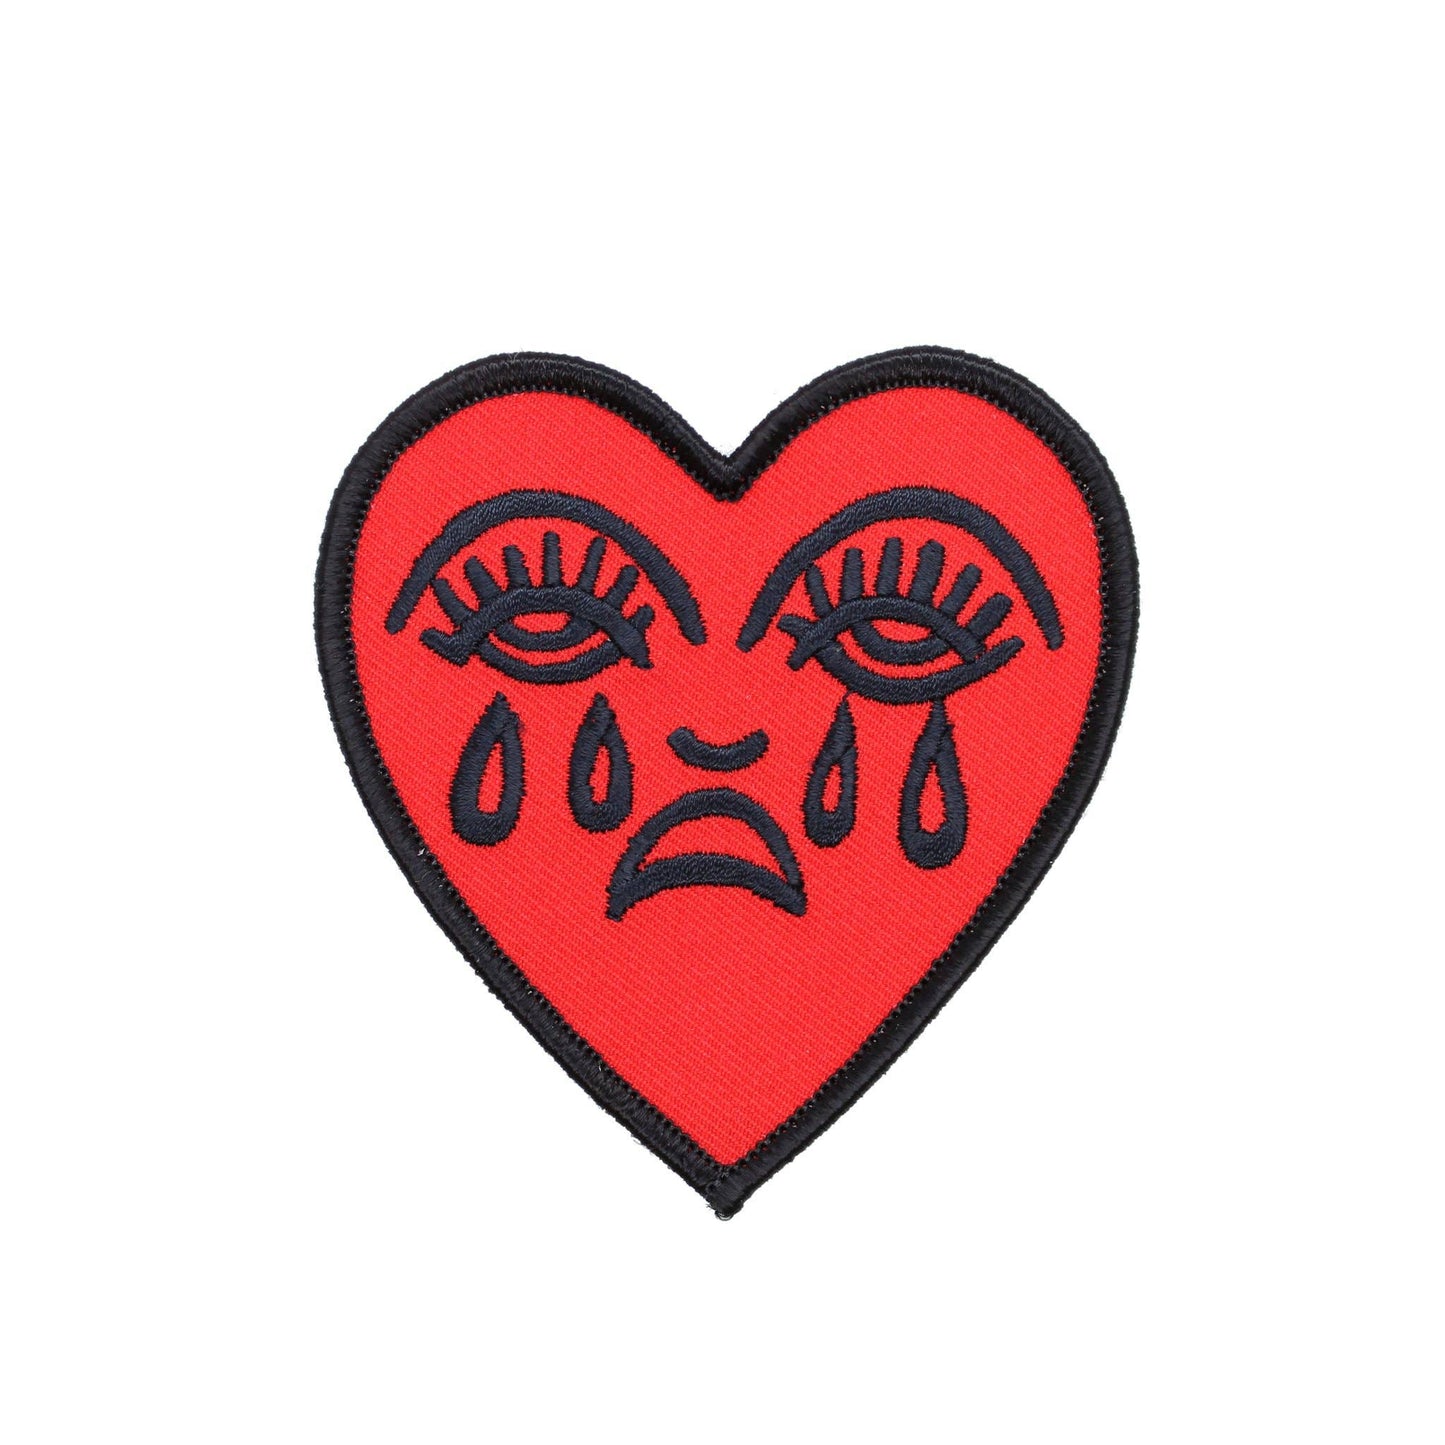 Crying Heart Embroidered Patch - Red